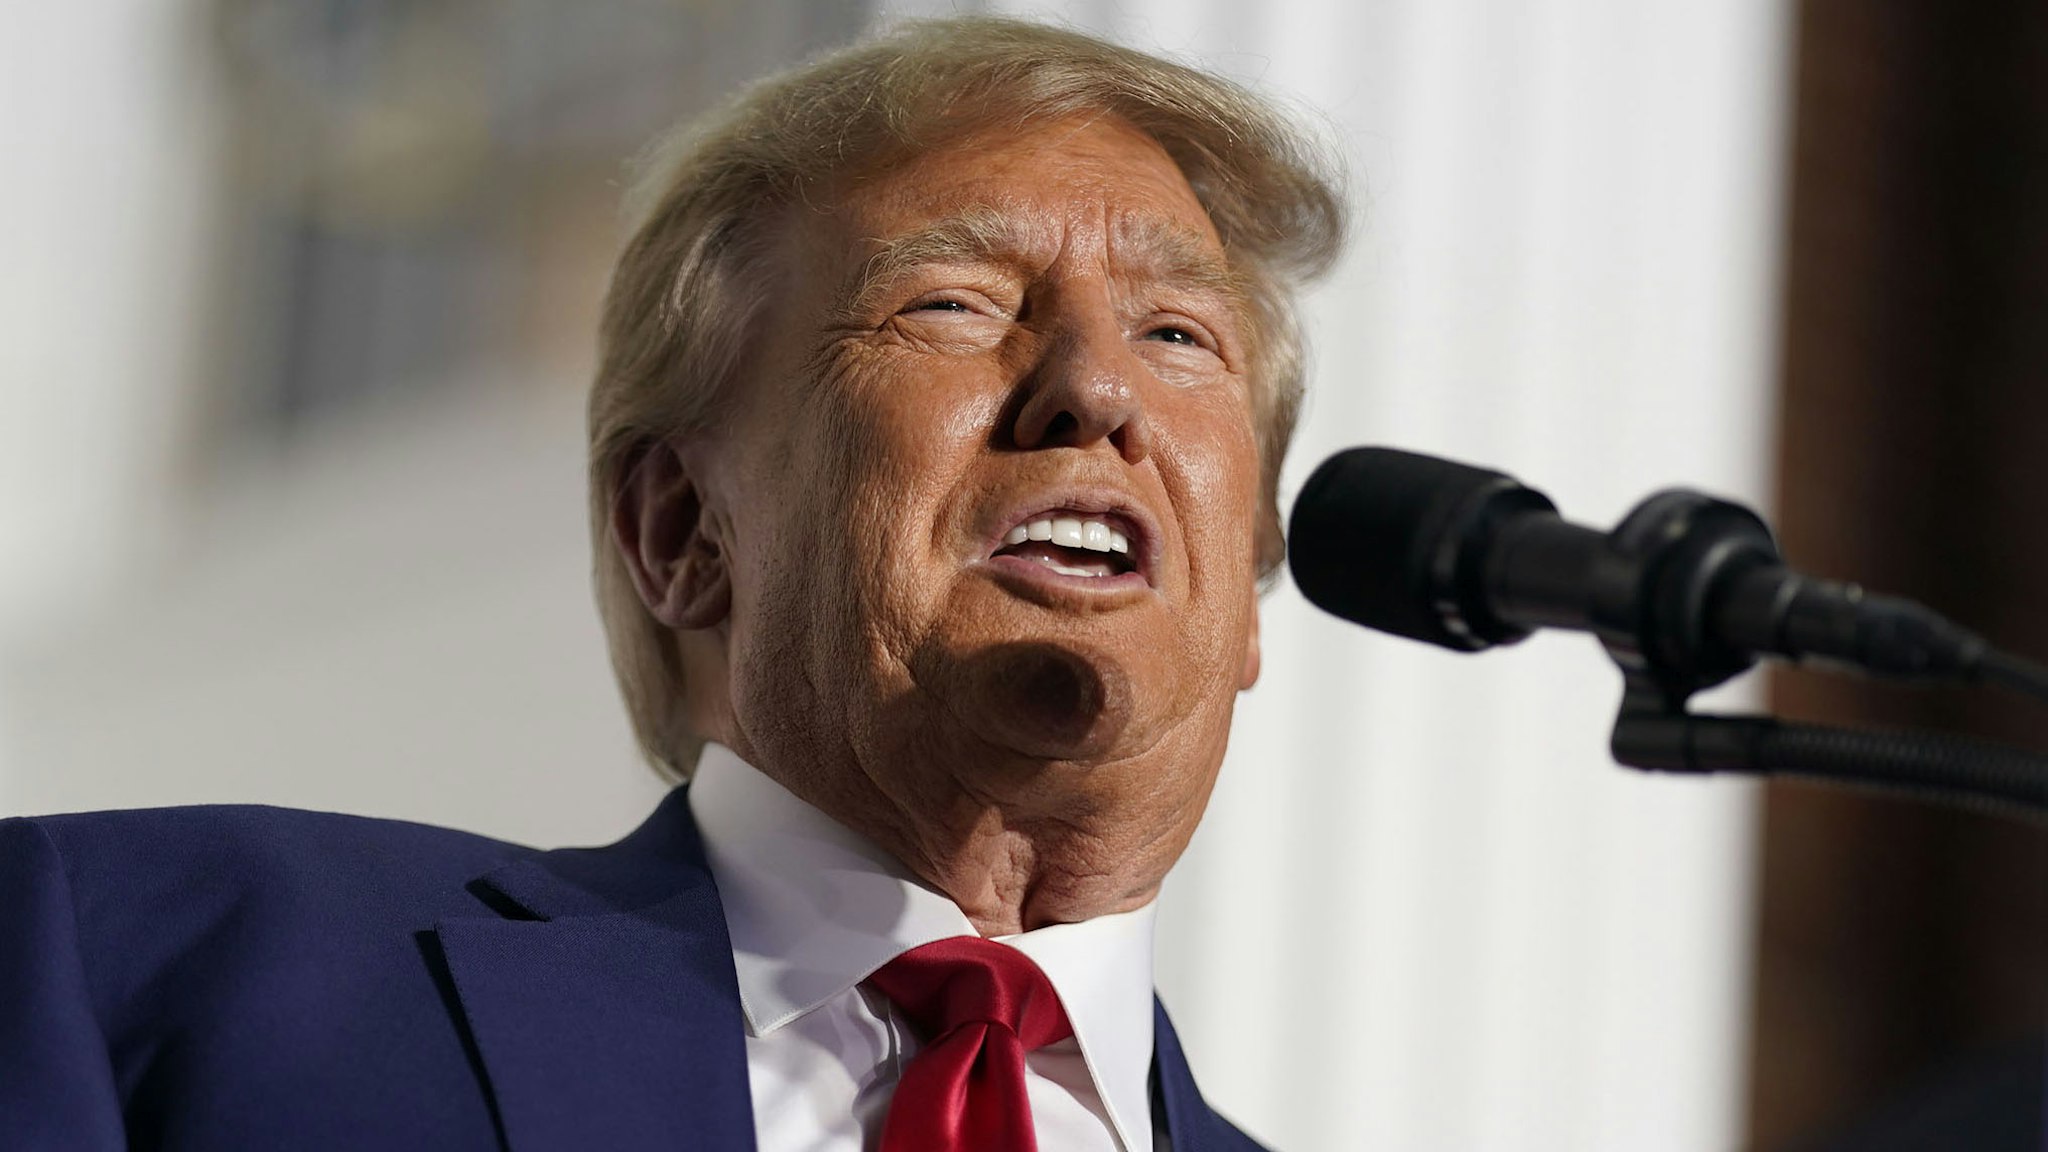 BEDMINSTER, NJ - June 13 : Former president Donald Trump speaks during an event at Trump National Golf Club in Bedminster, N.J. on Tuesday, June 13, 2023, following a first court appearance at Wilkie D. Ferguson Jr. U.S. Courthouse, in Miami, FL.